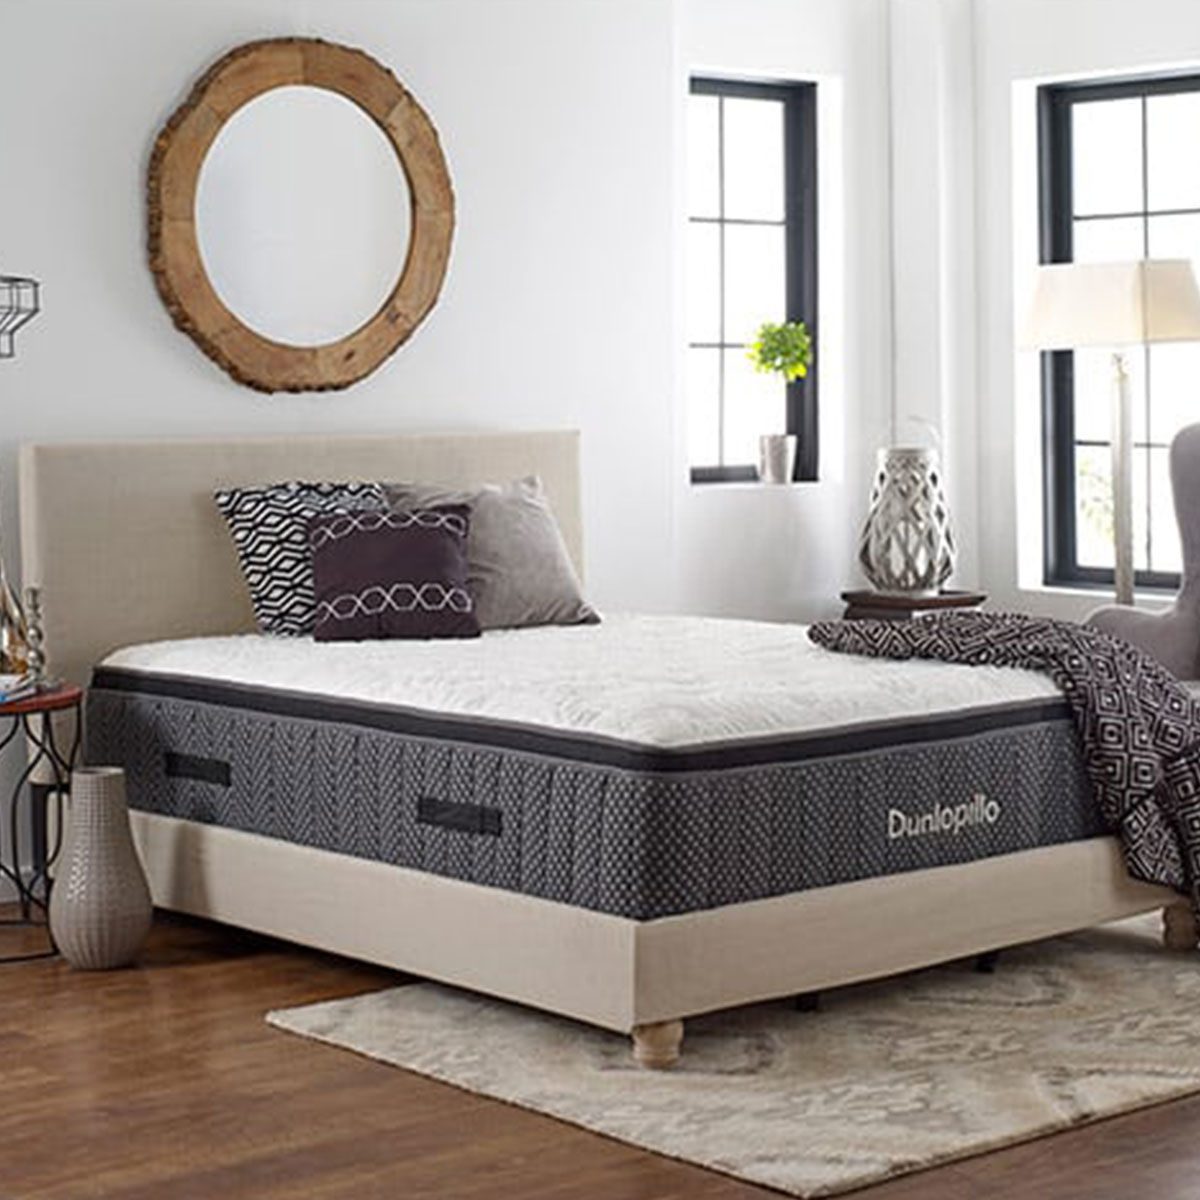 Picture of BARCELONA LUX FIRM QUEEN MATTRESS